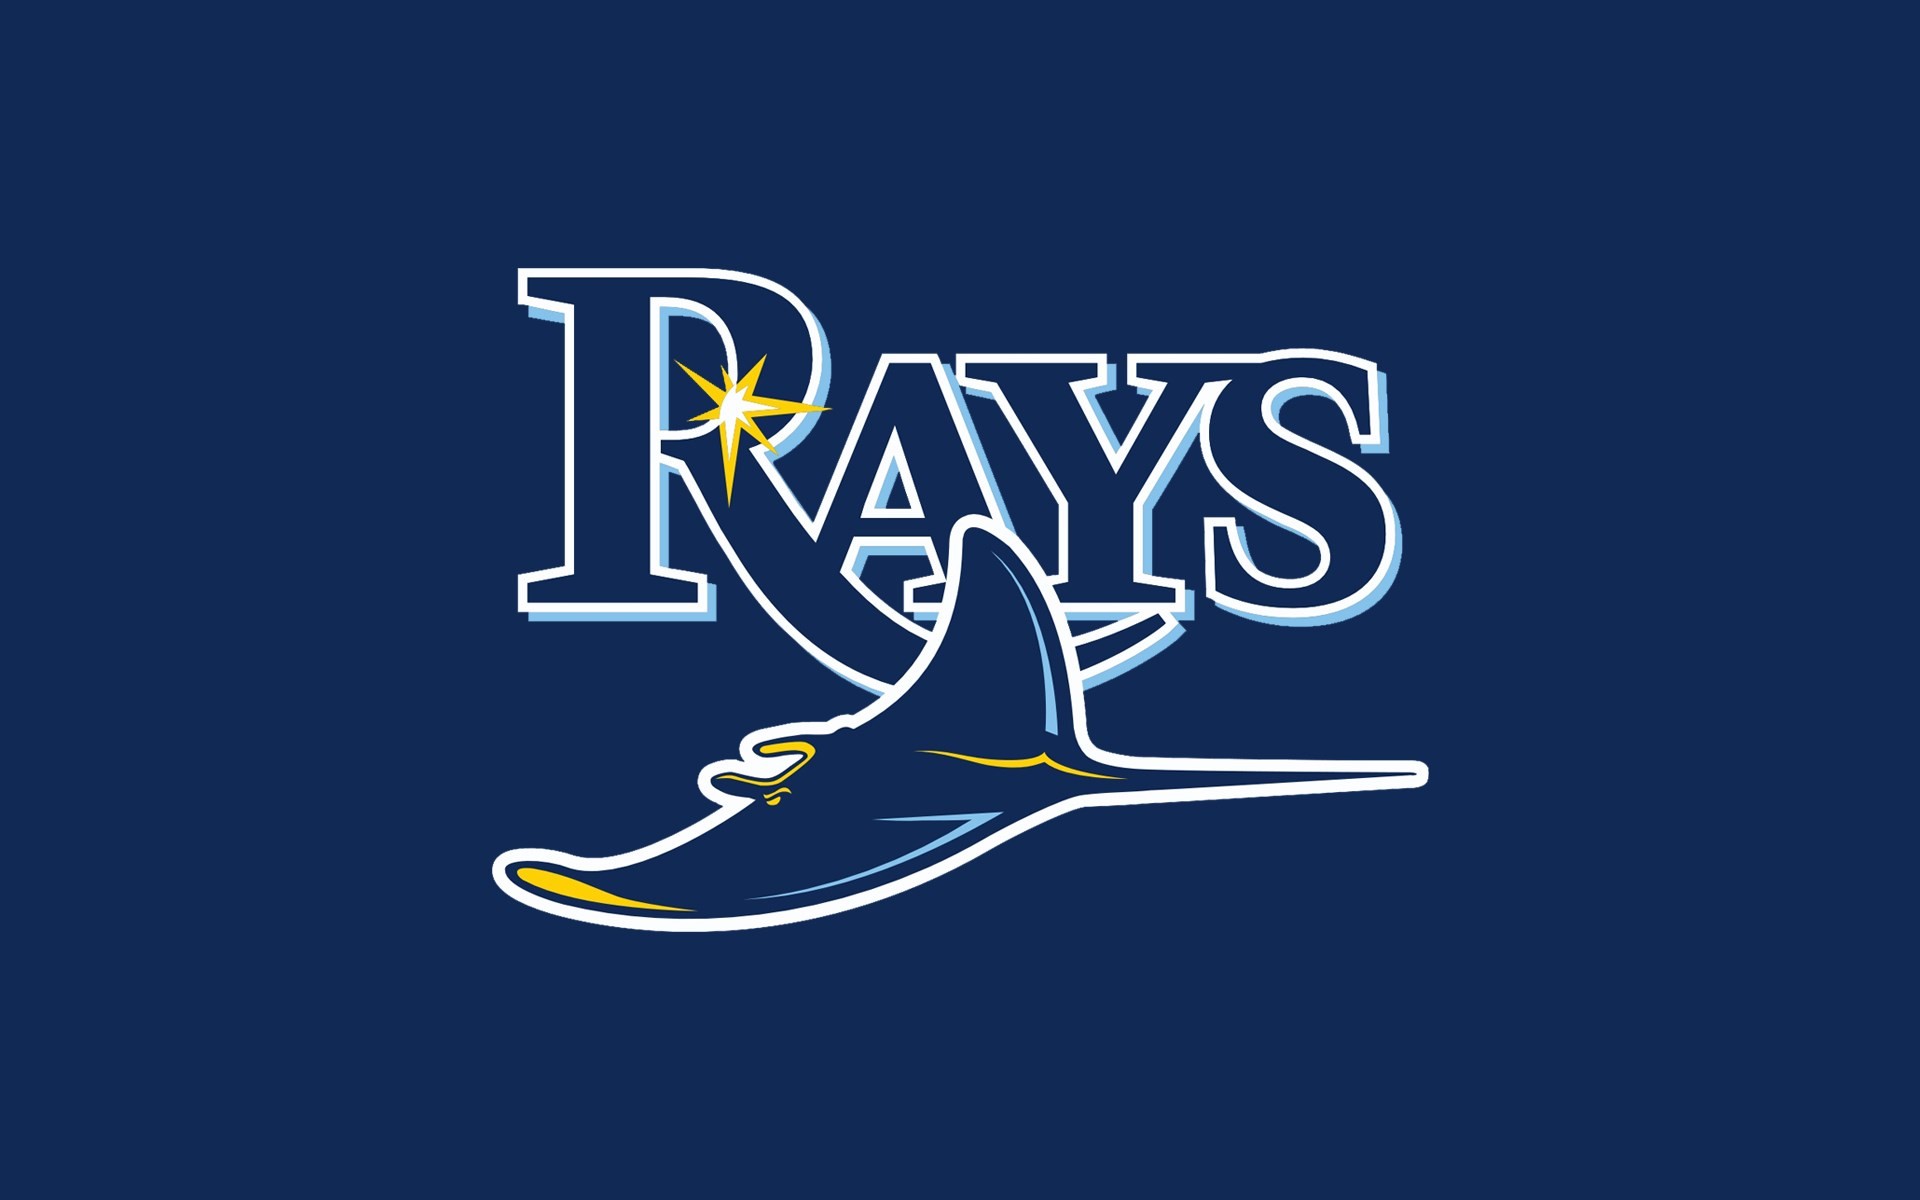 1920x1200 Images for Desktop: tampa bay rays wallpaper, Everly London 2016-12-05